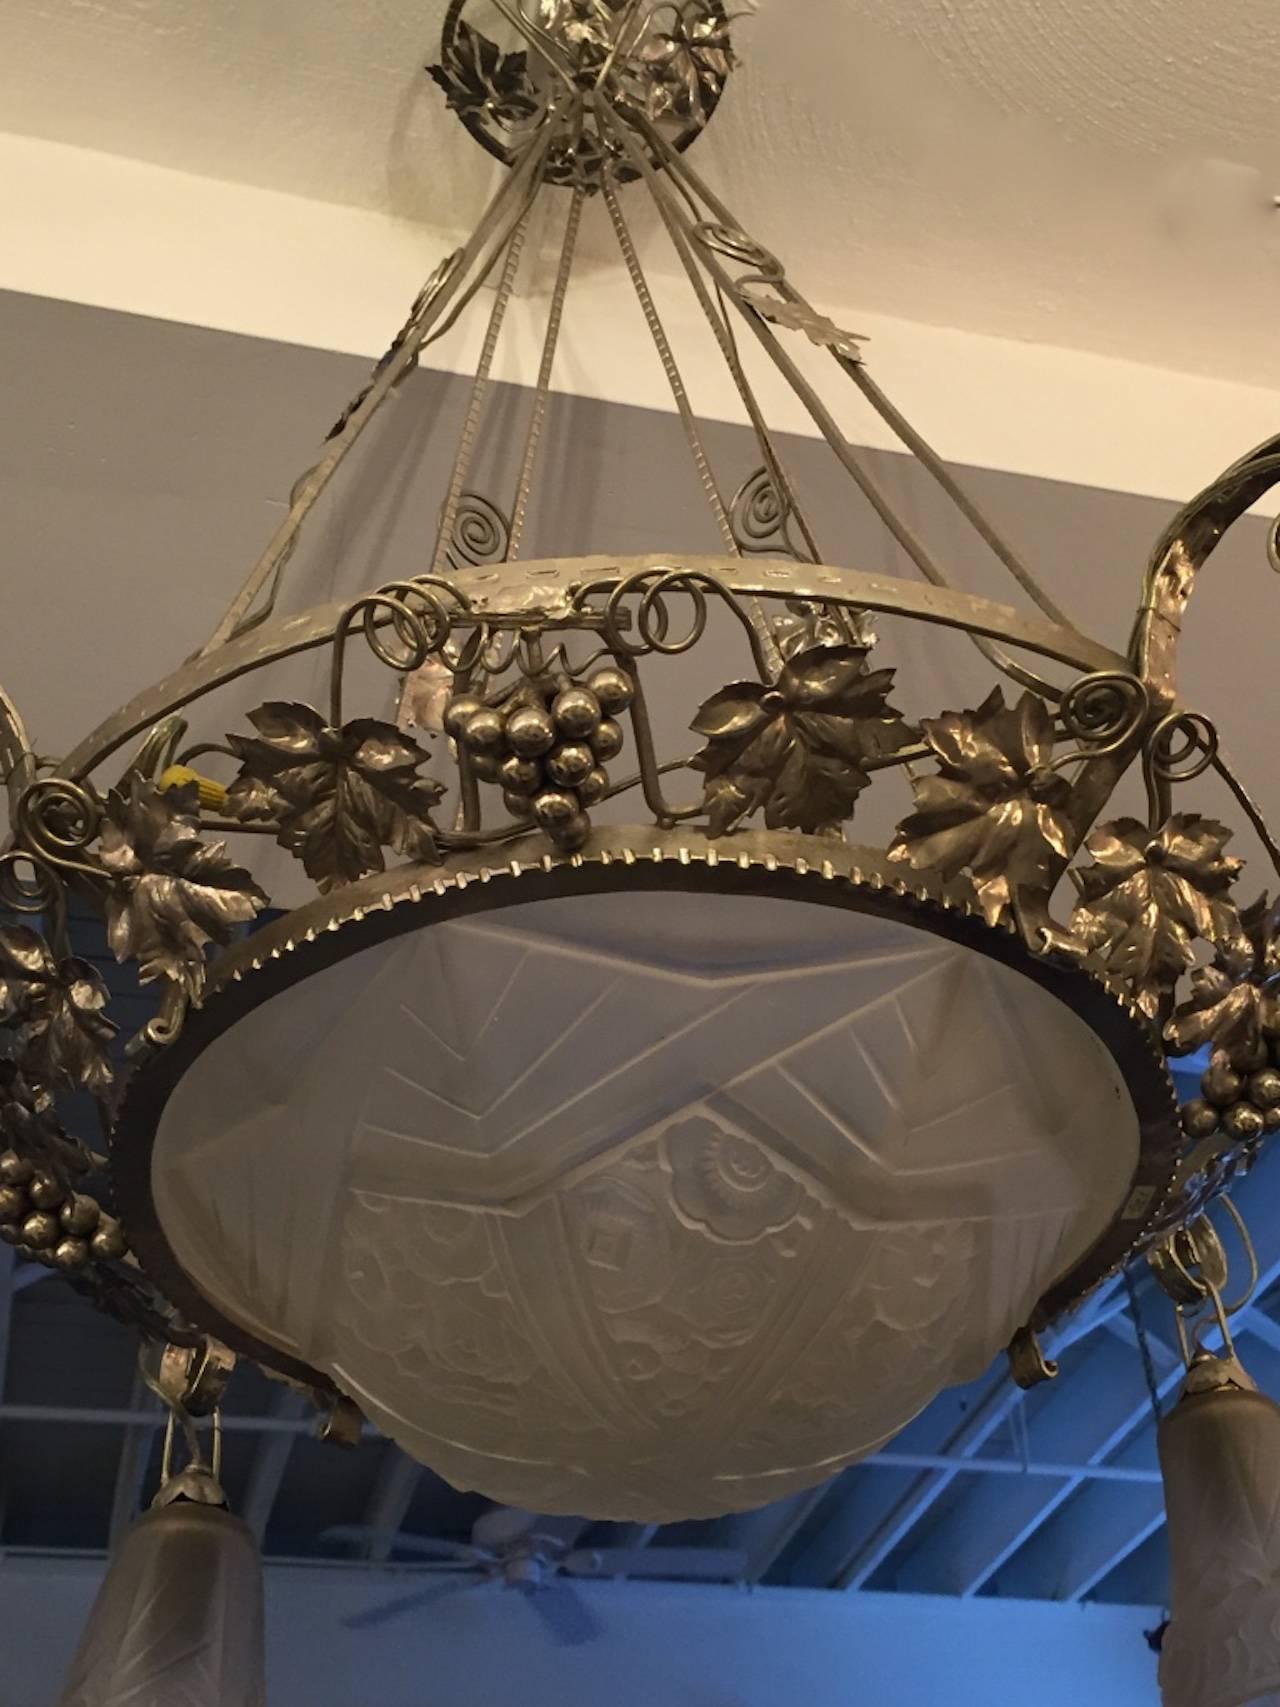 Mid-20th Century French Art Deco Chandelier with Grapes Motif For Sale